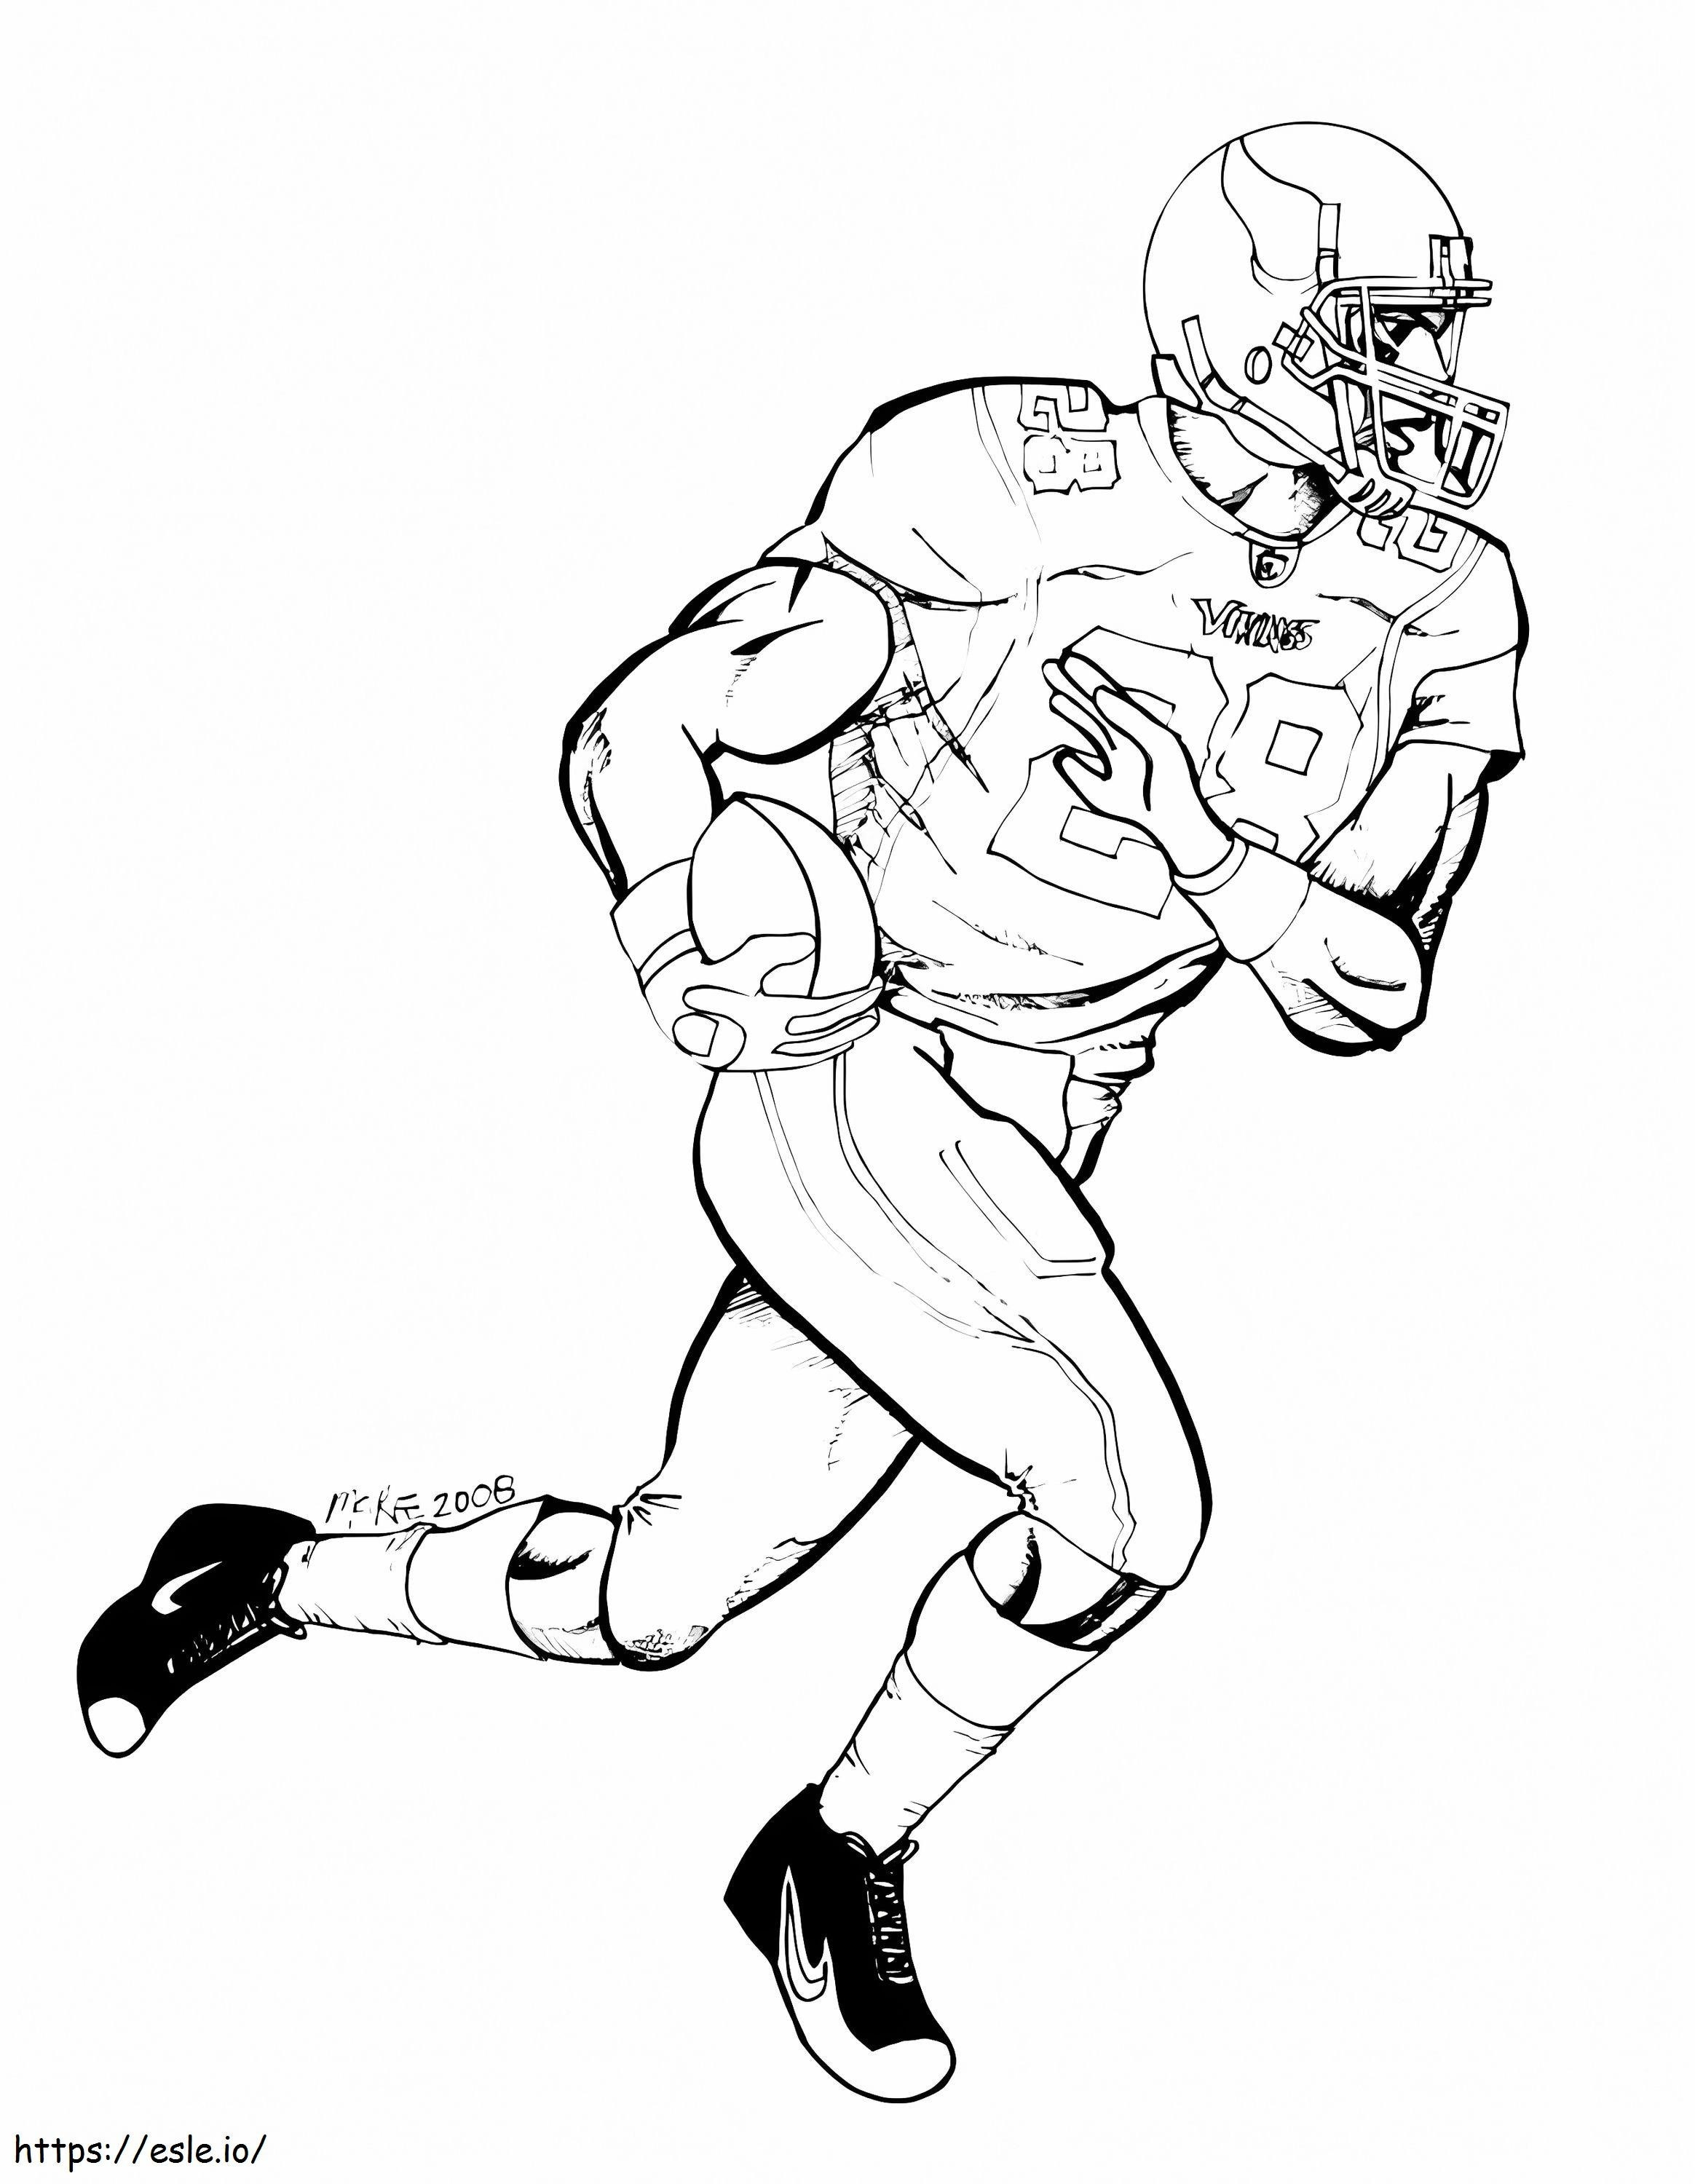 Cool Adrian Peterson coloring page